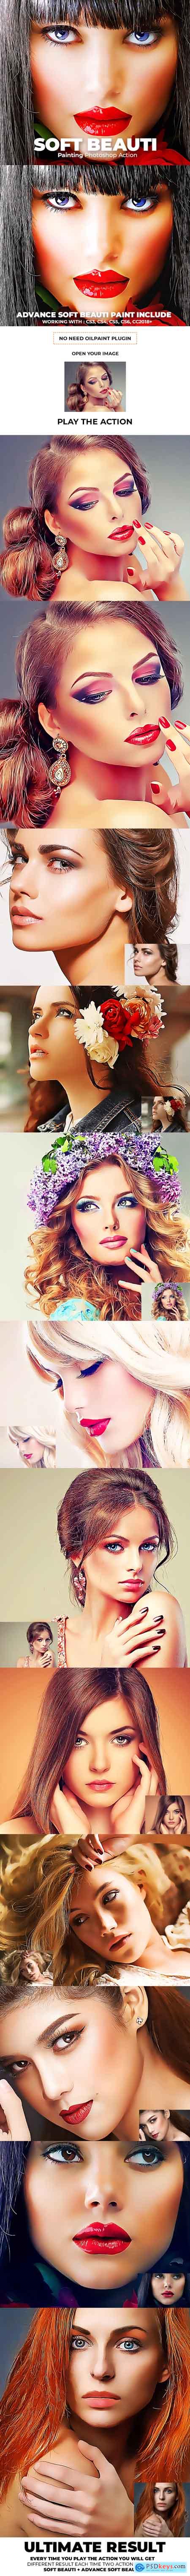 Graphicriver Soft Beauty Painting Photoshop Action